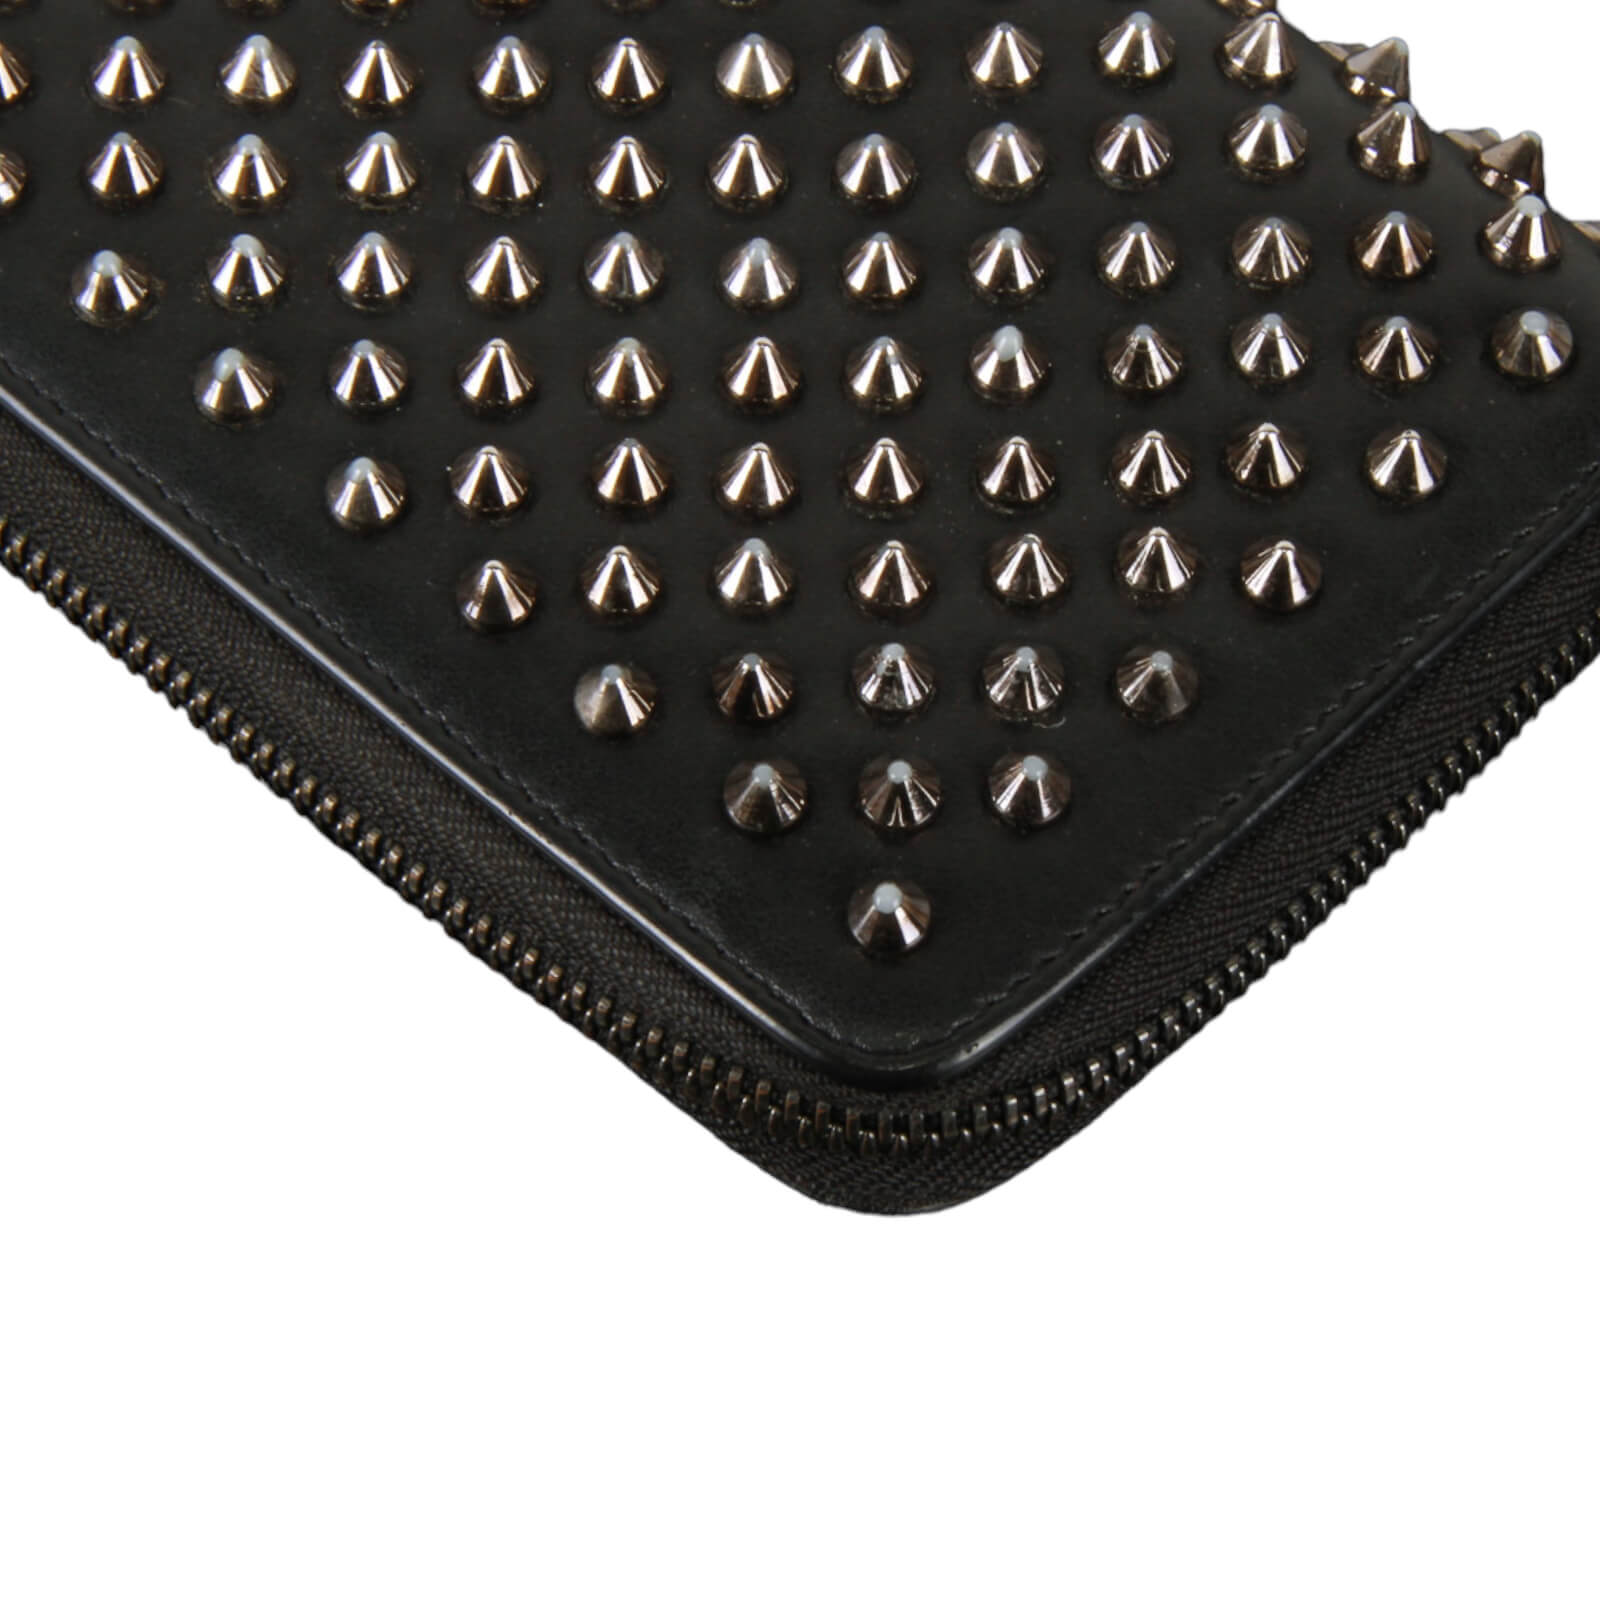 Christian Louboutin Panettone Round Zip Bifold Wallet Black Leather Spike  Studs